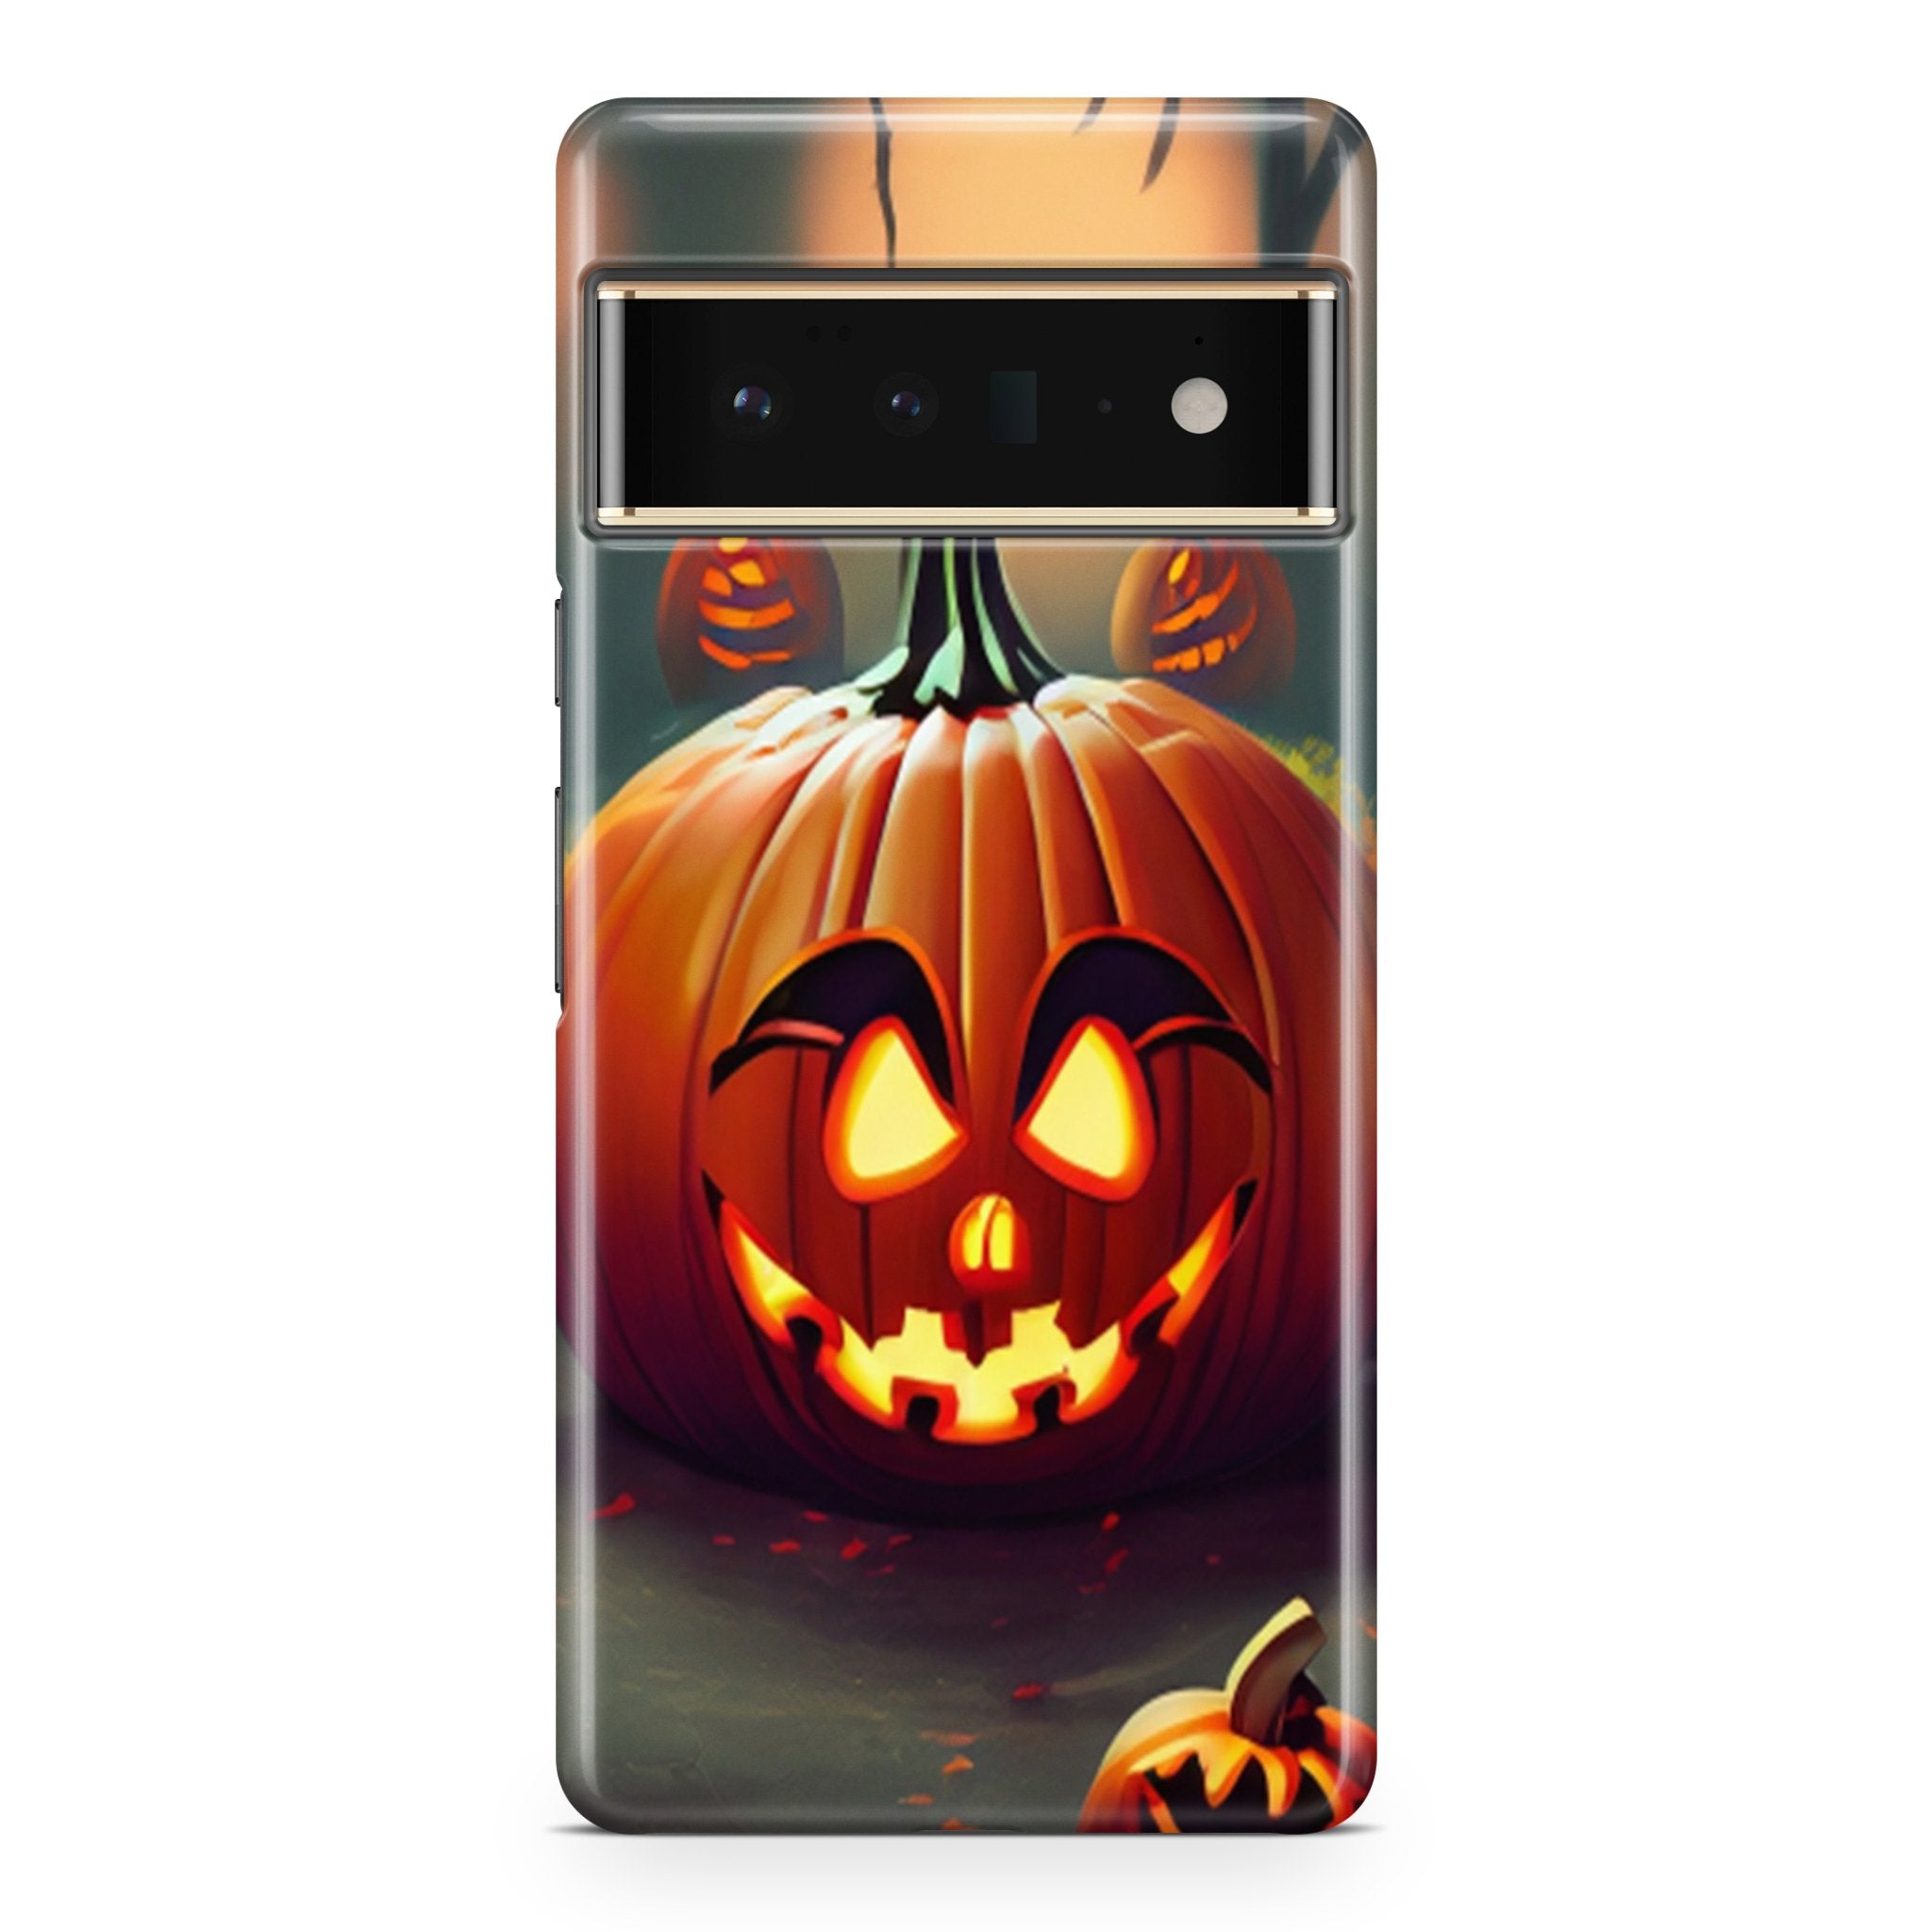 Jack-O-Lantern - Google phone case designs by CaseSwagger